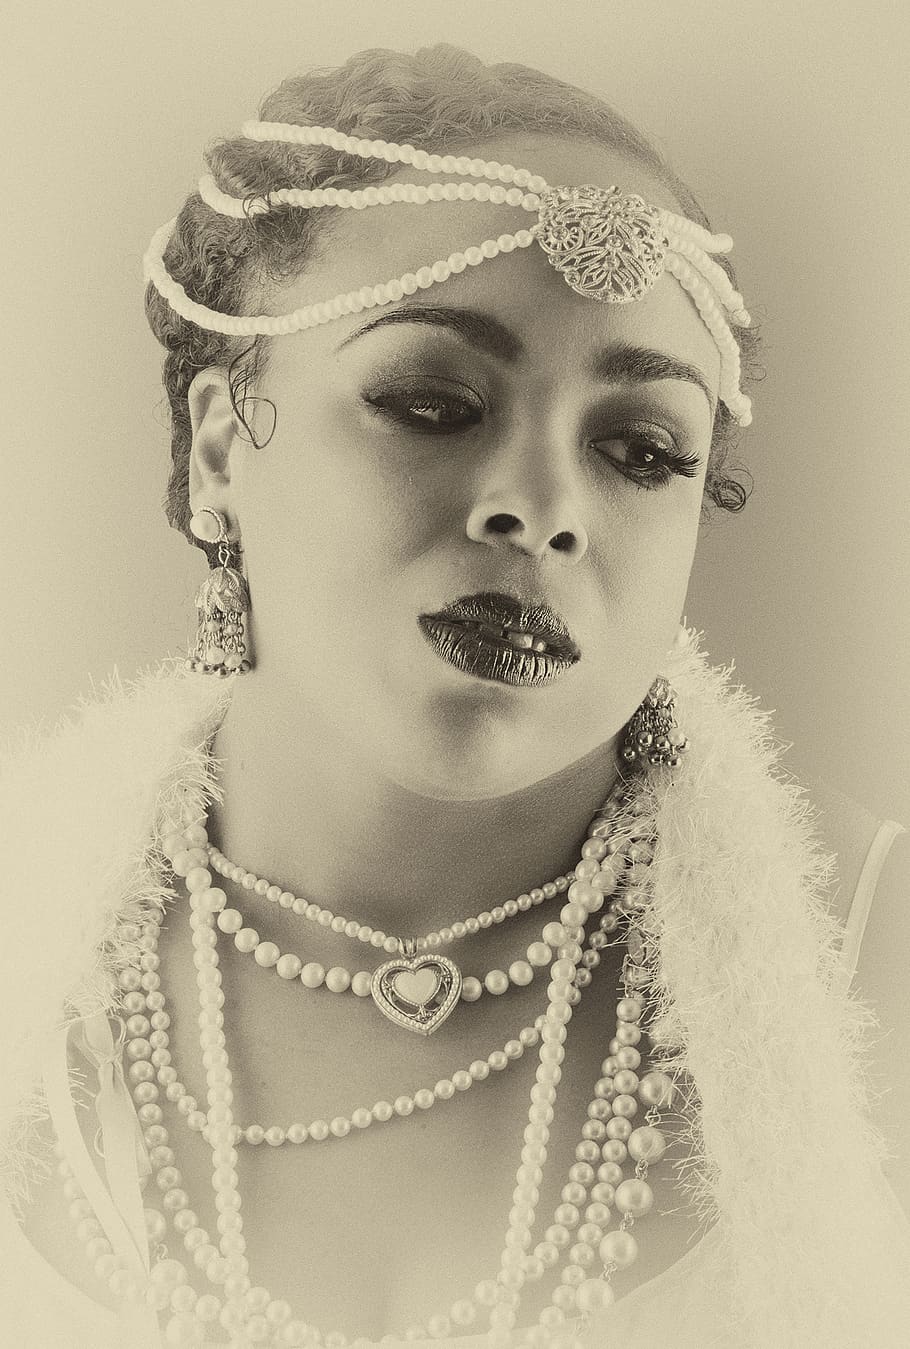 josephine baker, portrait, vintage, face, woman, one person, headshot, clothing, real people, indoors